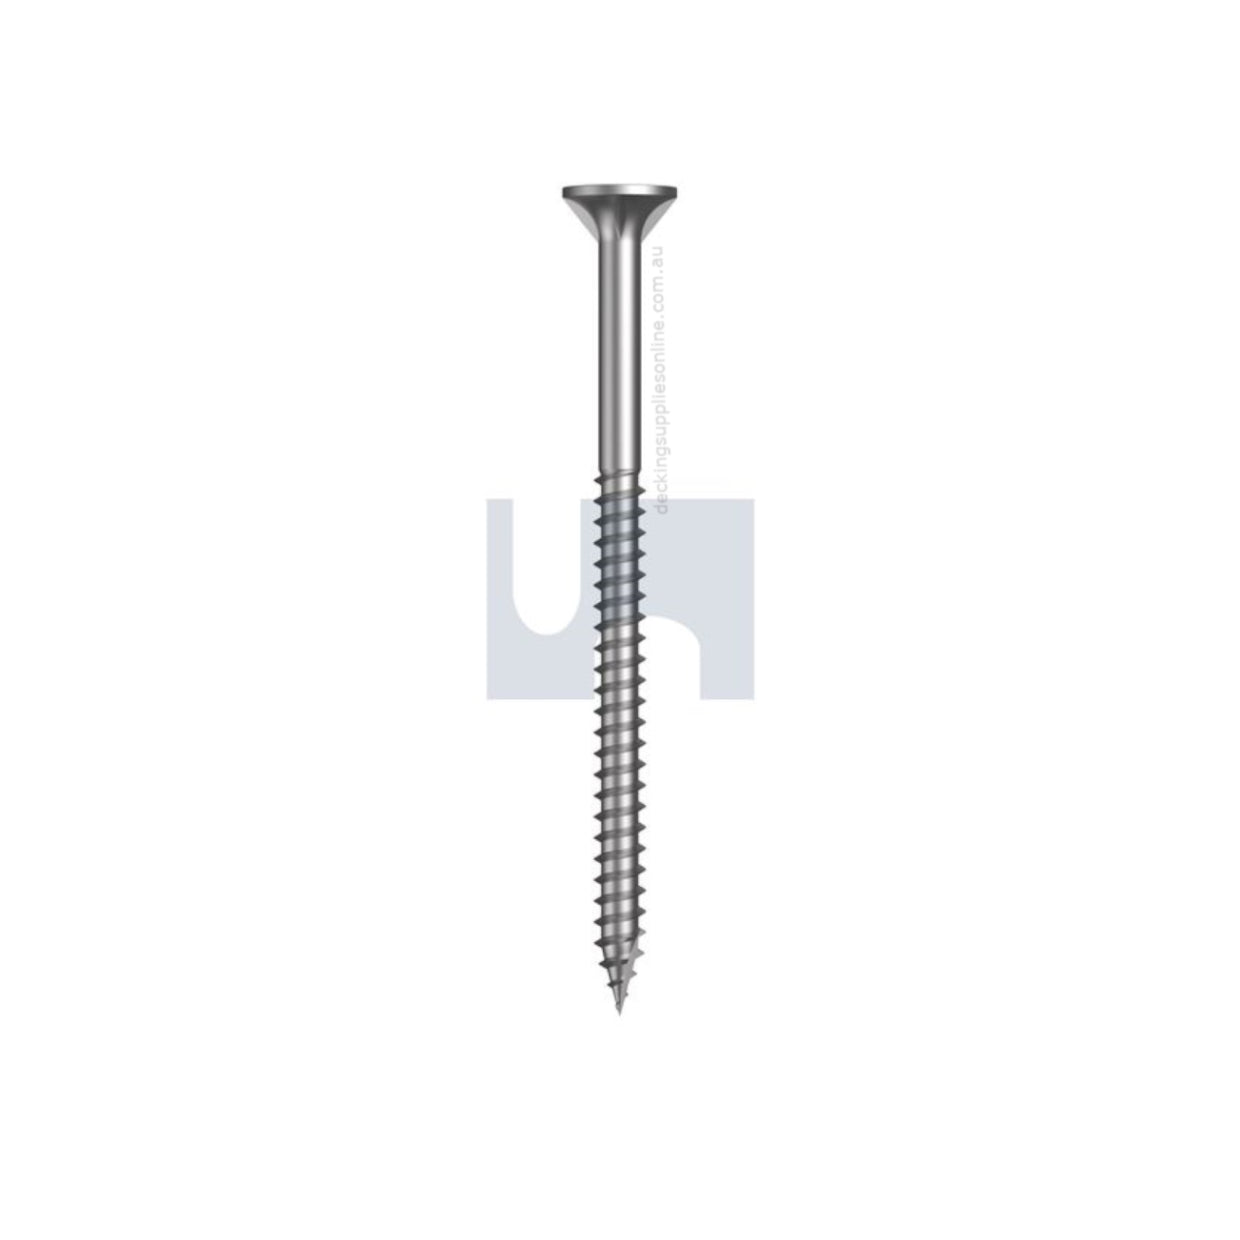 HOBSON - Bugle Head 14G 100mm 304 Stainless Steel, Self-Drilling Type 17 - Box of 250